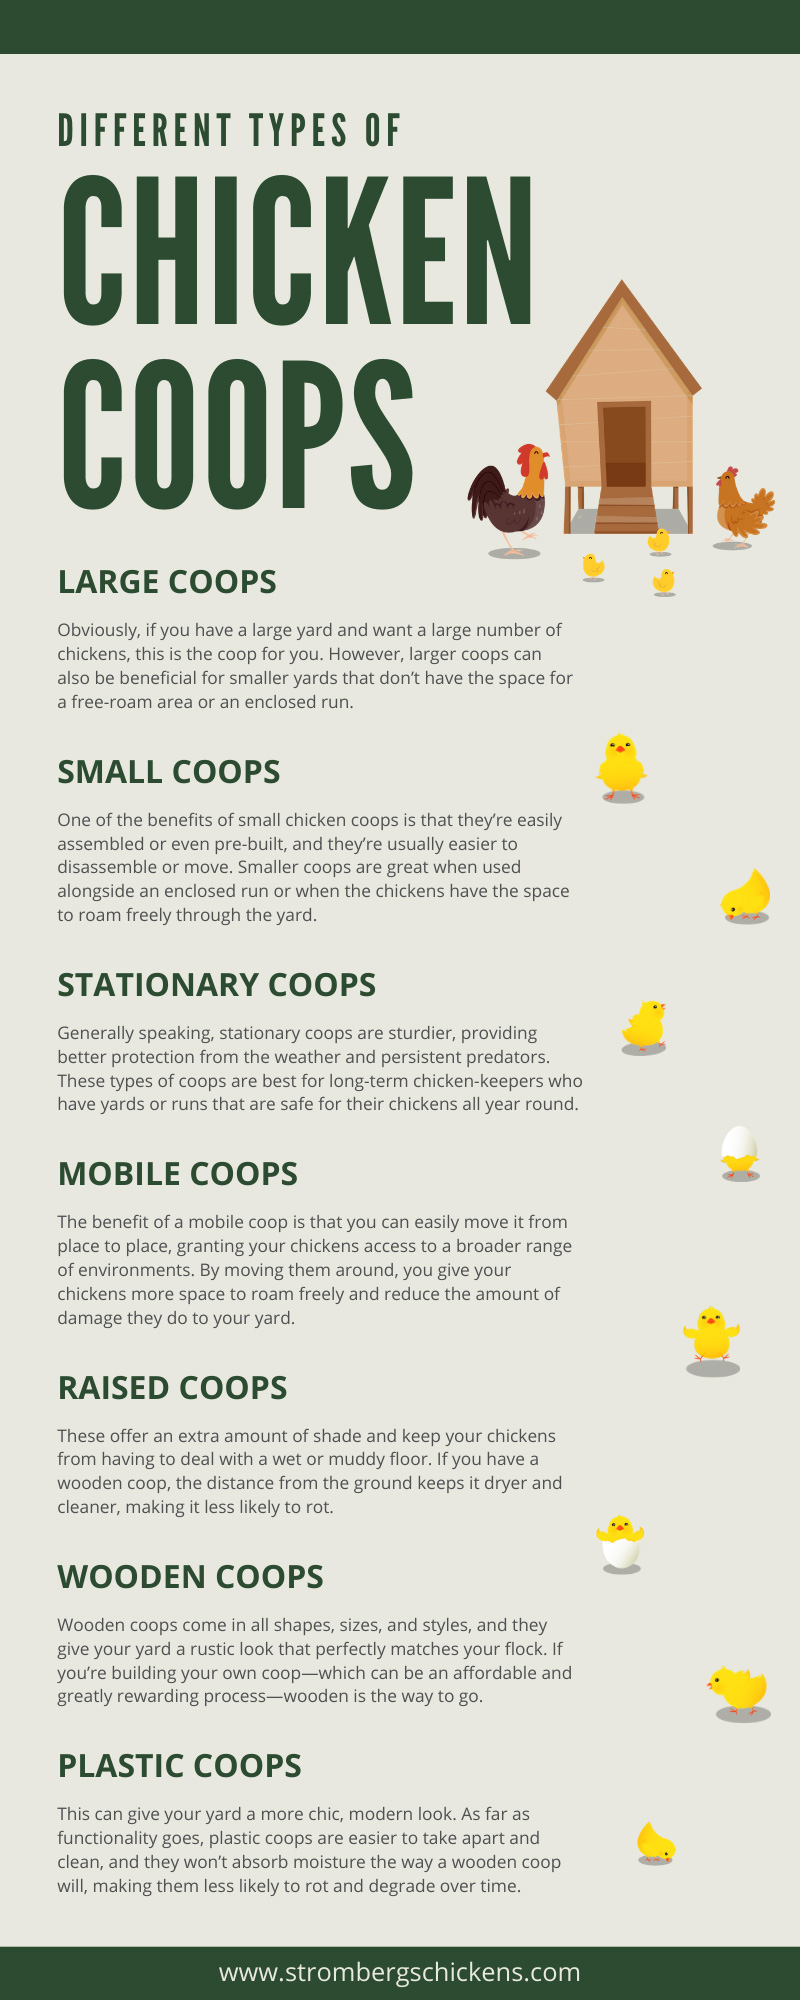 Different Types of Chicken Coops Infographic